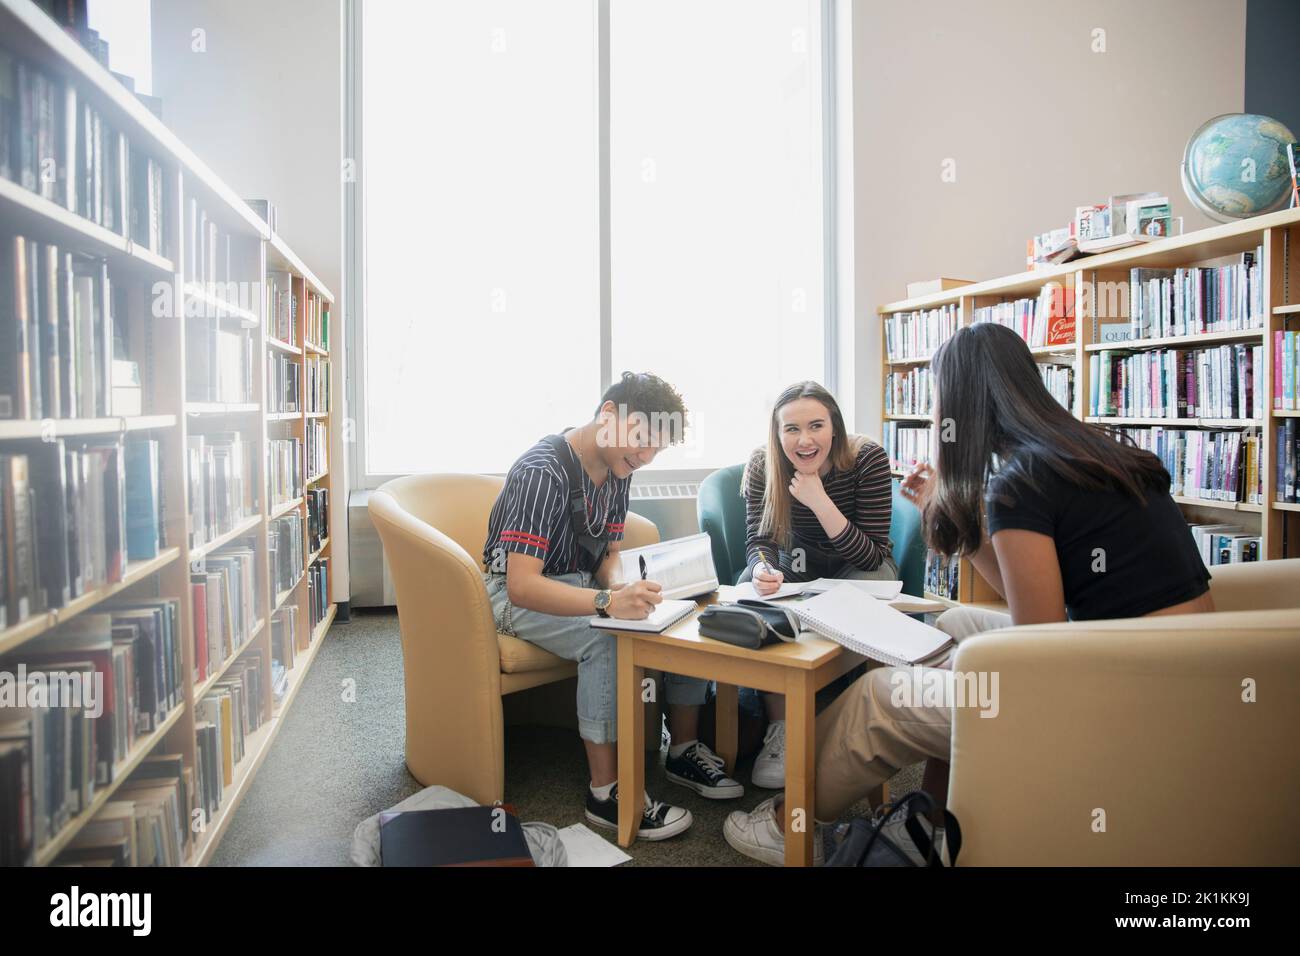 High School Students Talking And Studying In Library Stock Photo Alamy